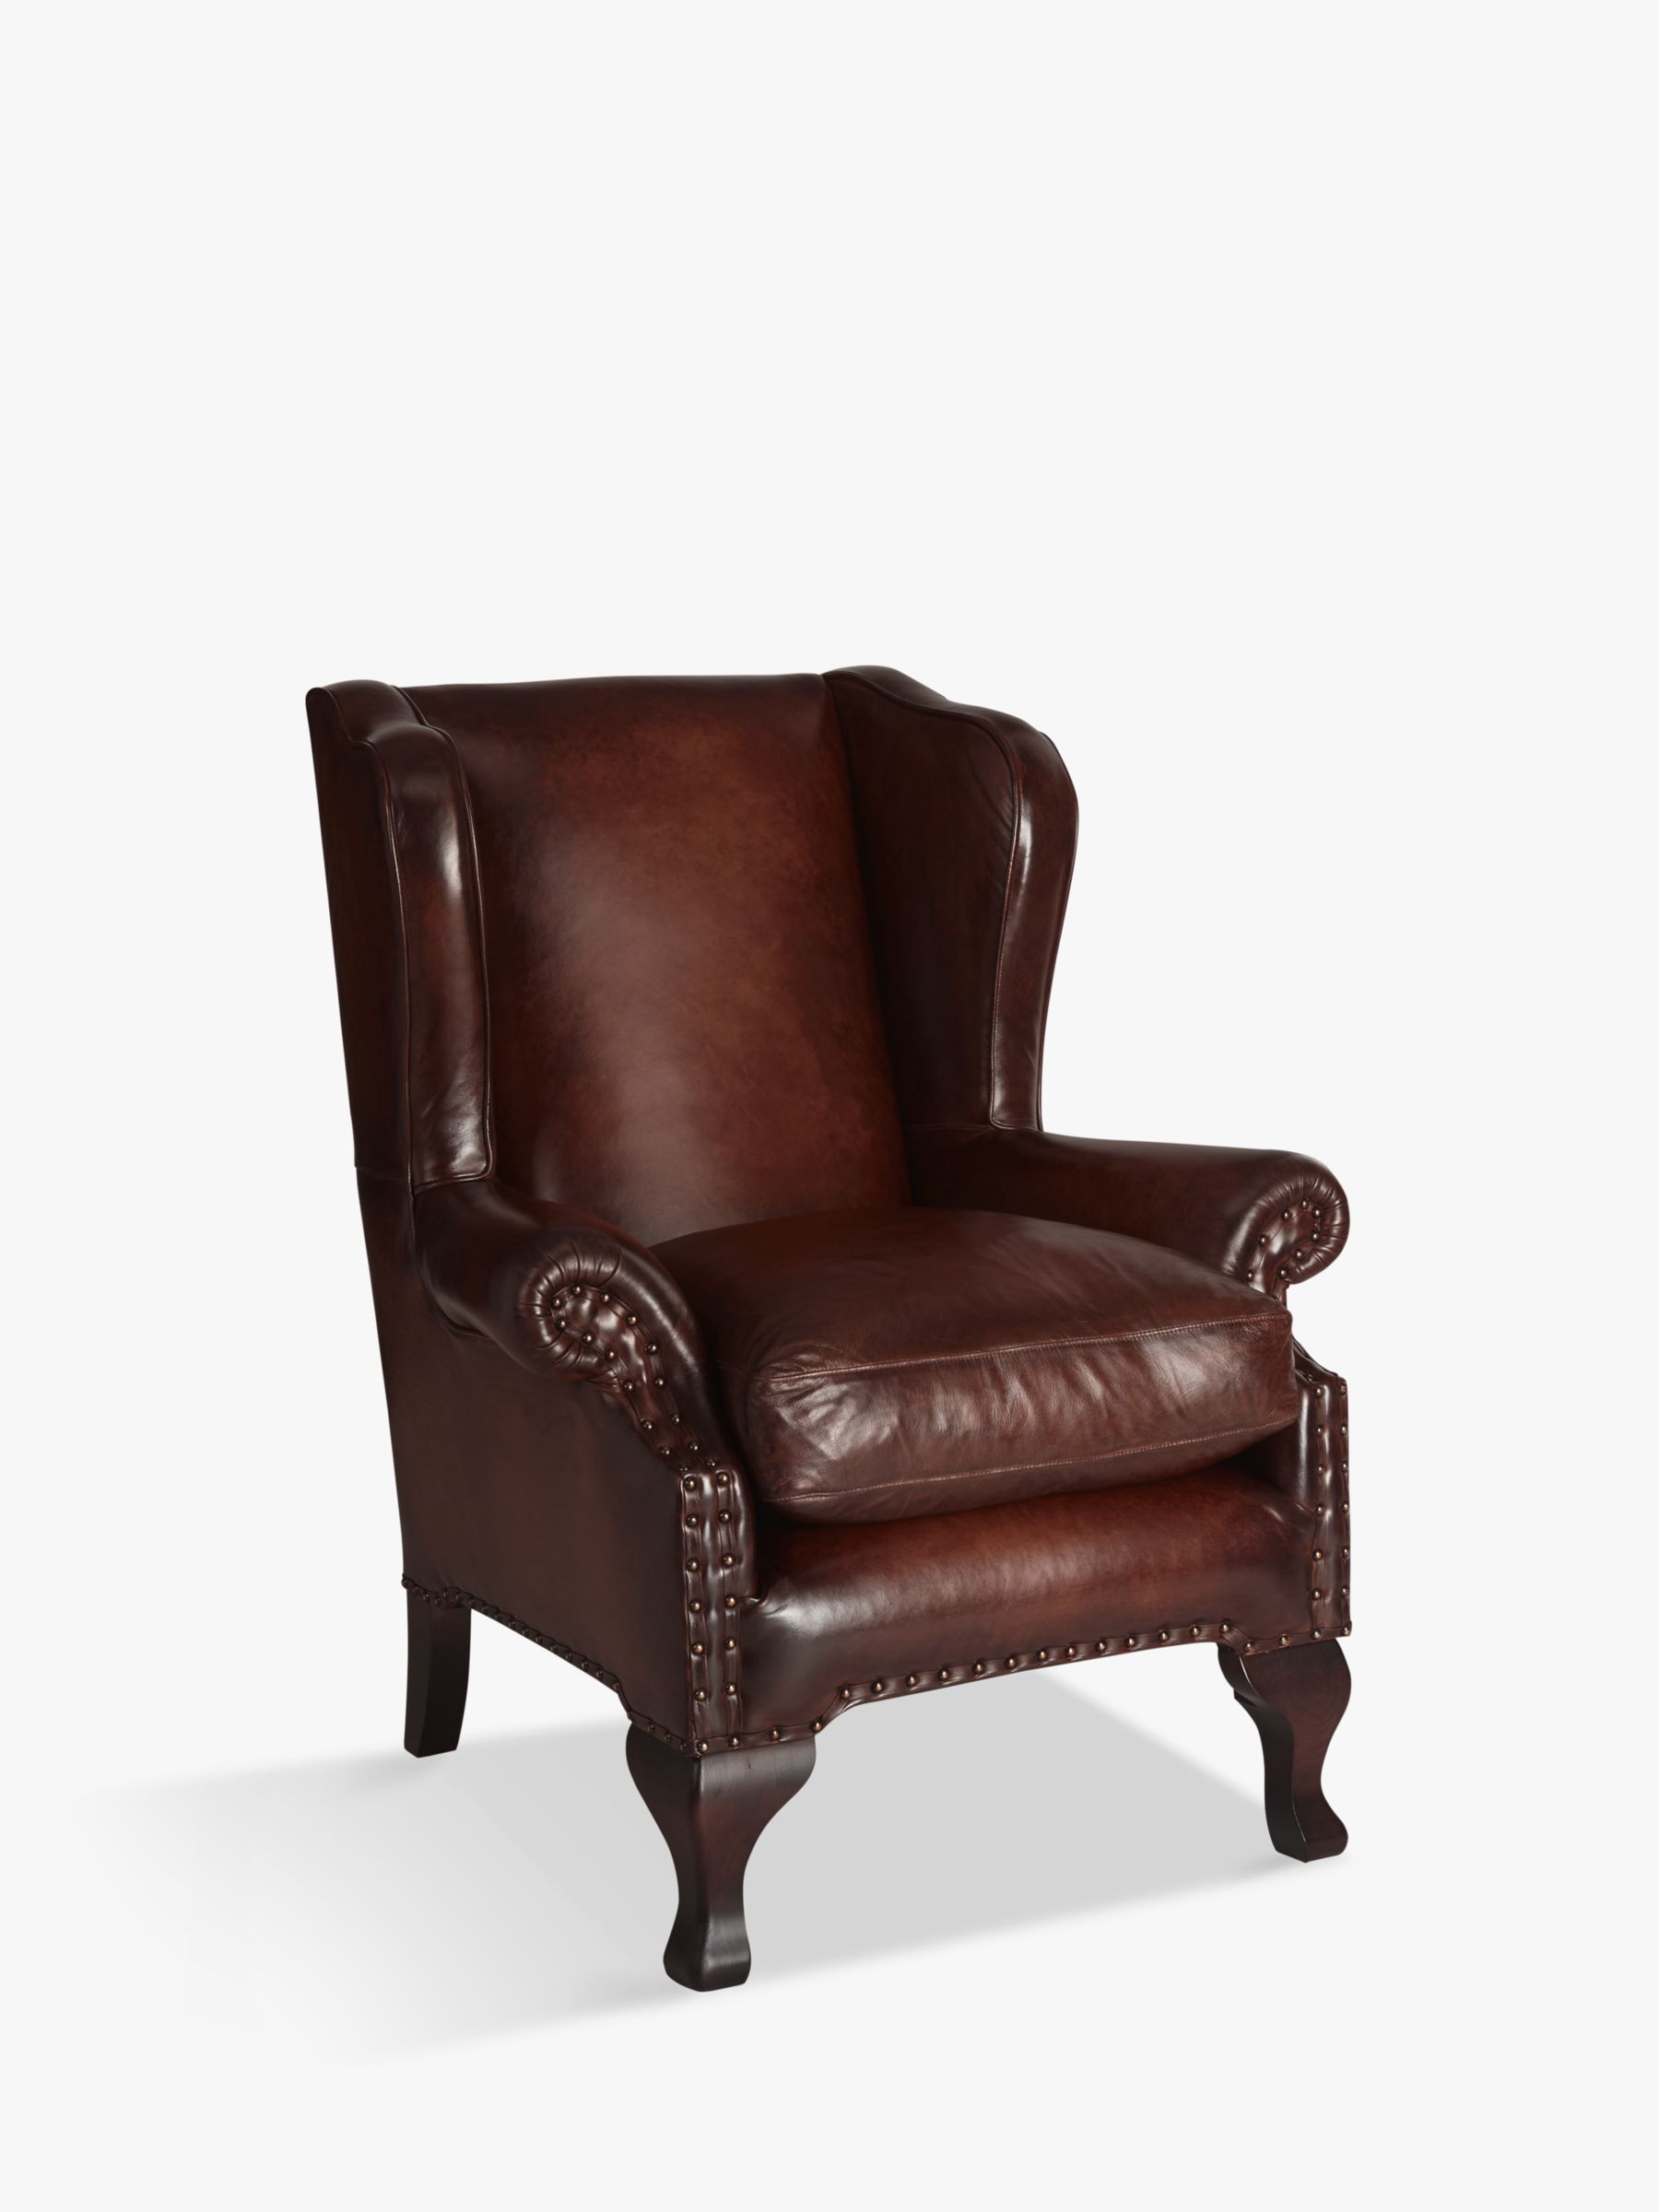 John Lewis Compton Leather Wing Chair at JohnLewis